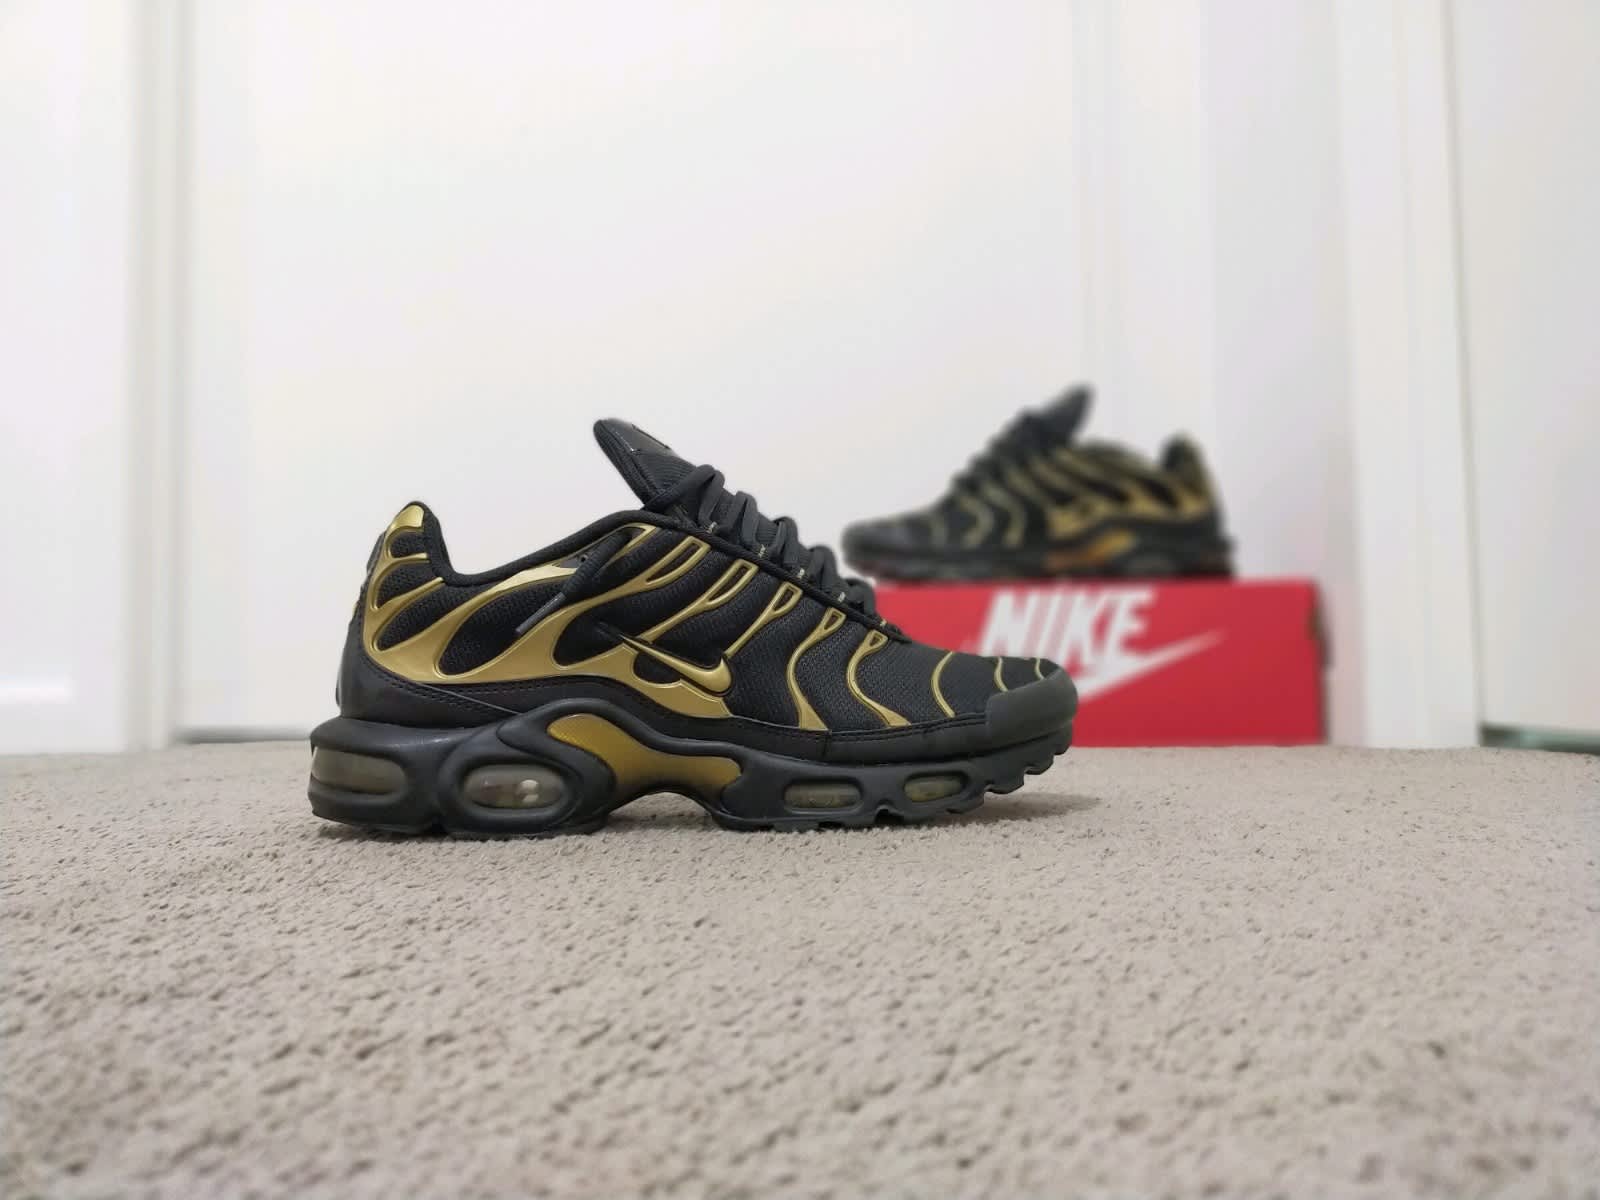 Nike Air Max Plus III 'Chainmail' Available in: Men's US9.5 Men's